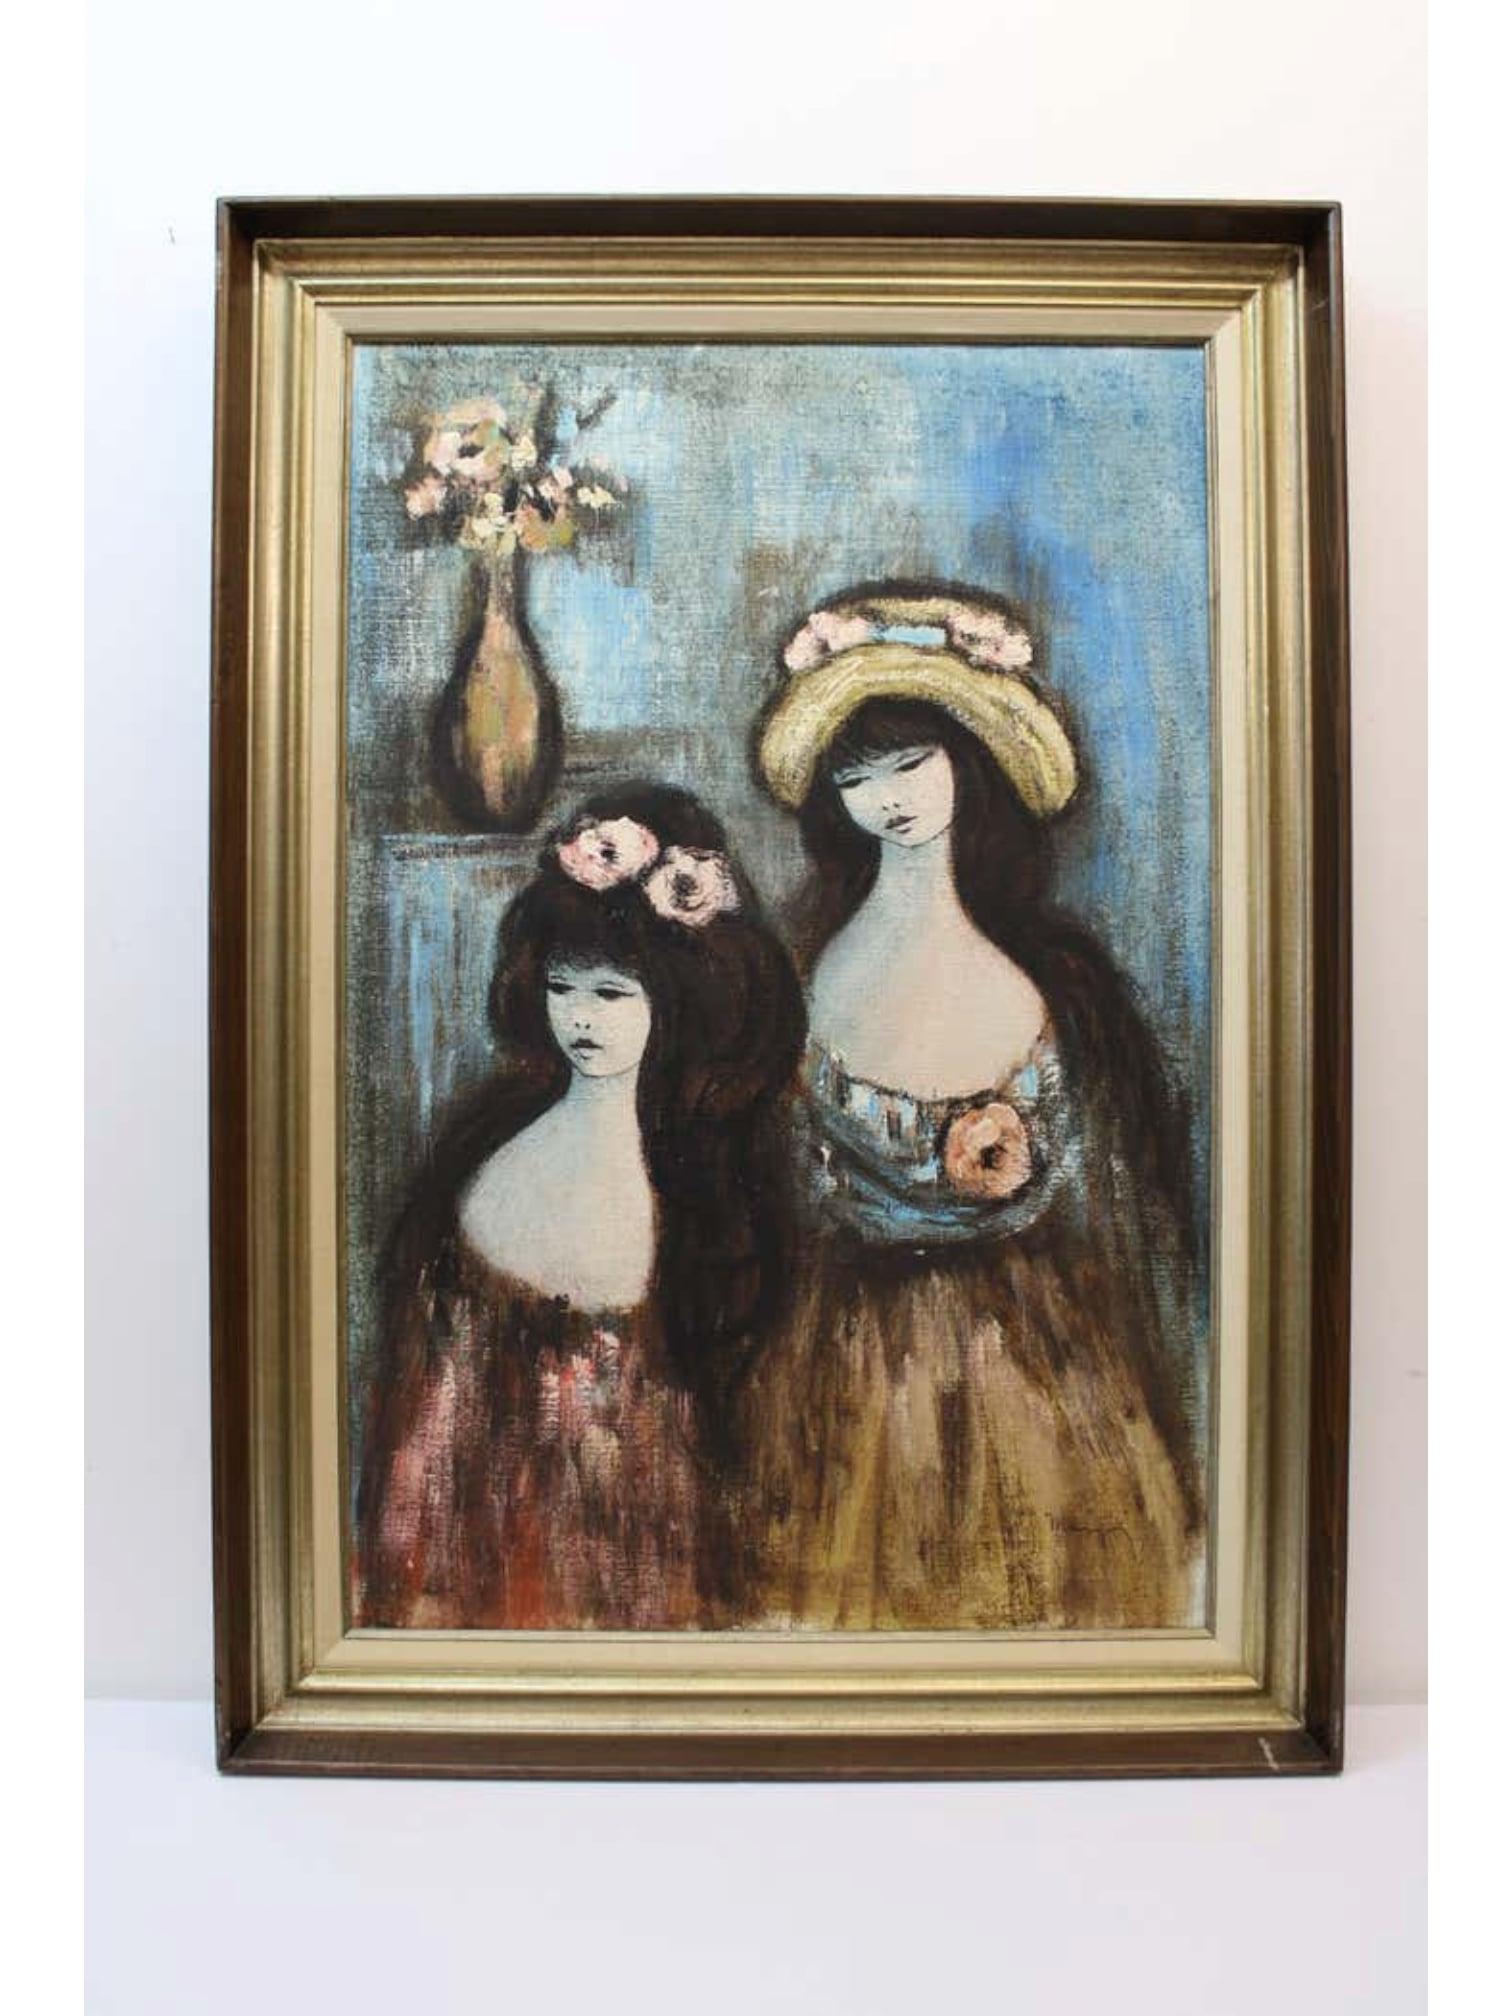 Classic Paul Marigny (1922-1998, French) painting of 2 young ladies with flowers.
Oil on canvas
Canvas dimensions 24" x 36"
Frame dimensions 30" x 42"